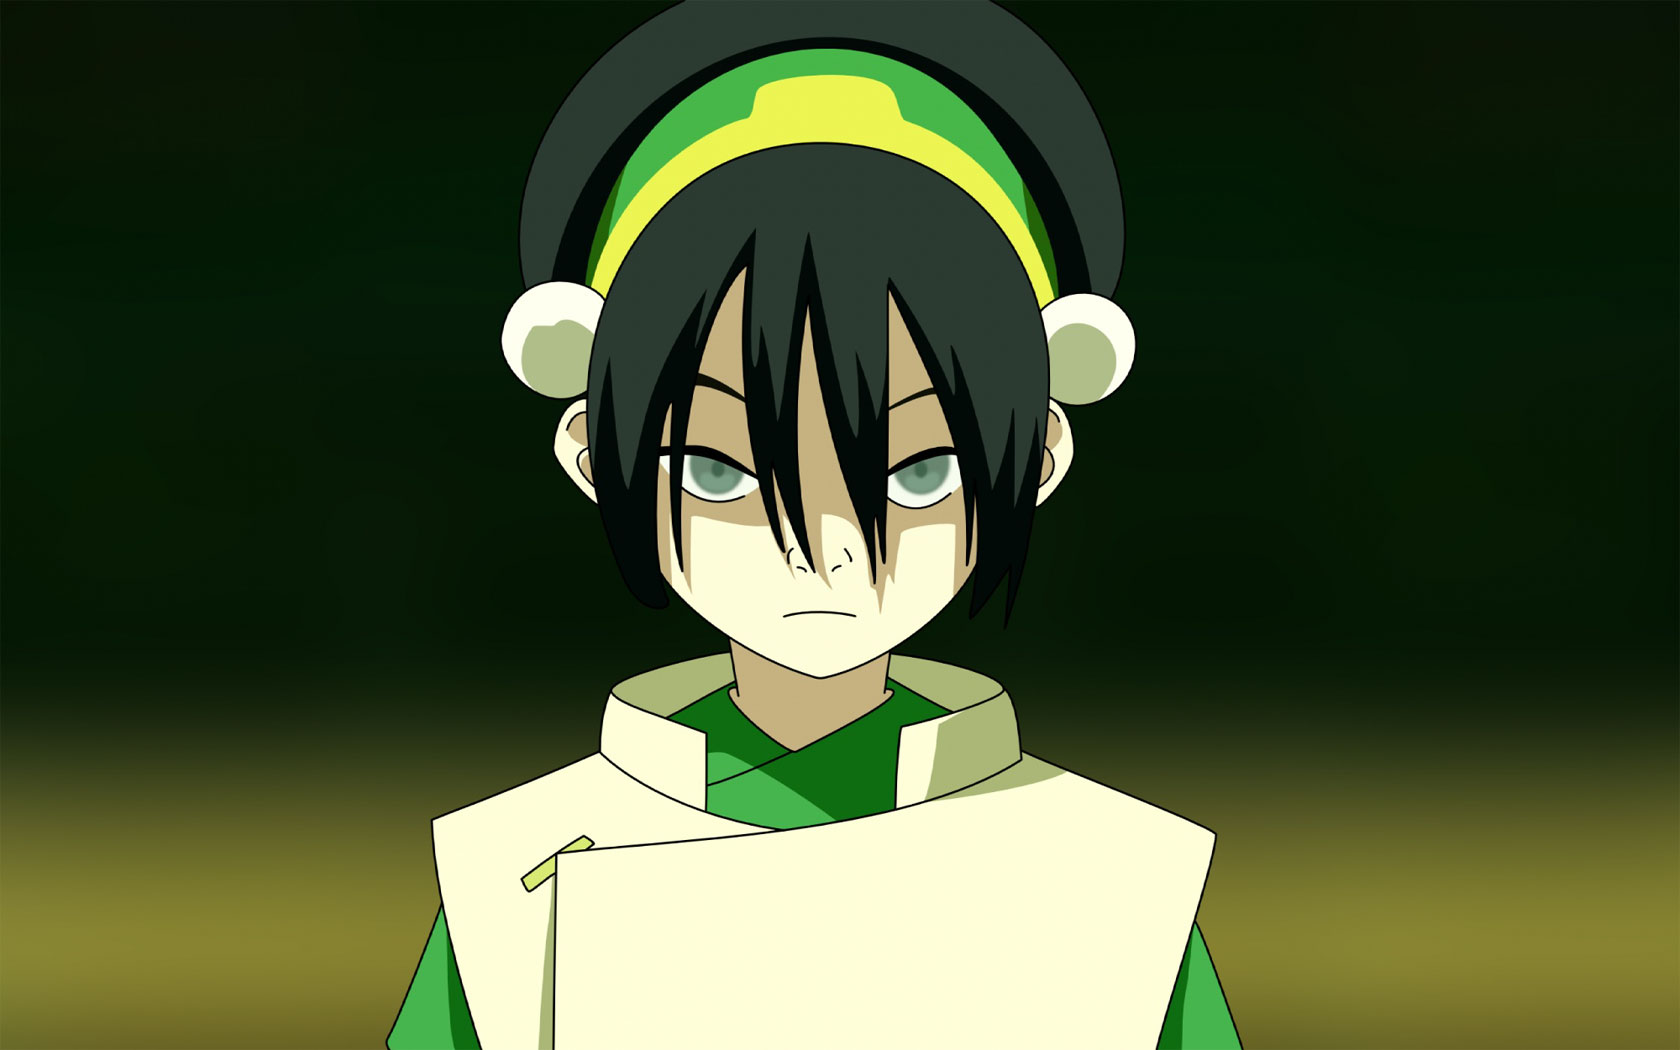 Image Of Avatar The Last Airbender Toph Wallpaper Anime And Manga